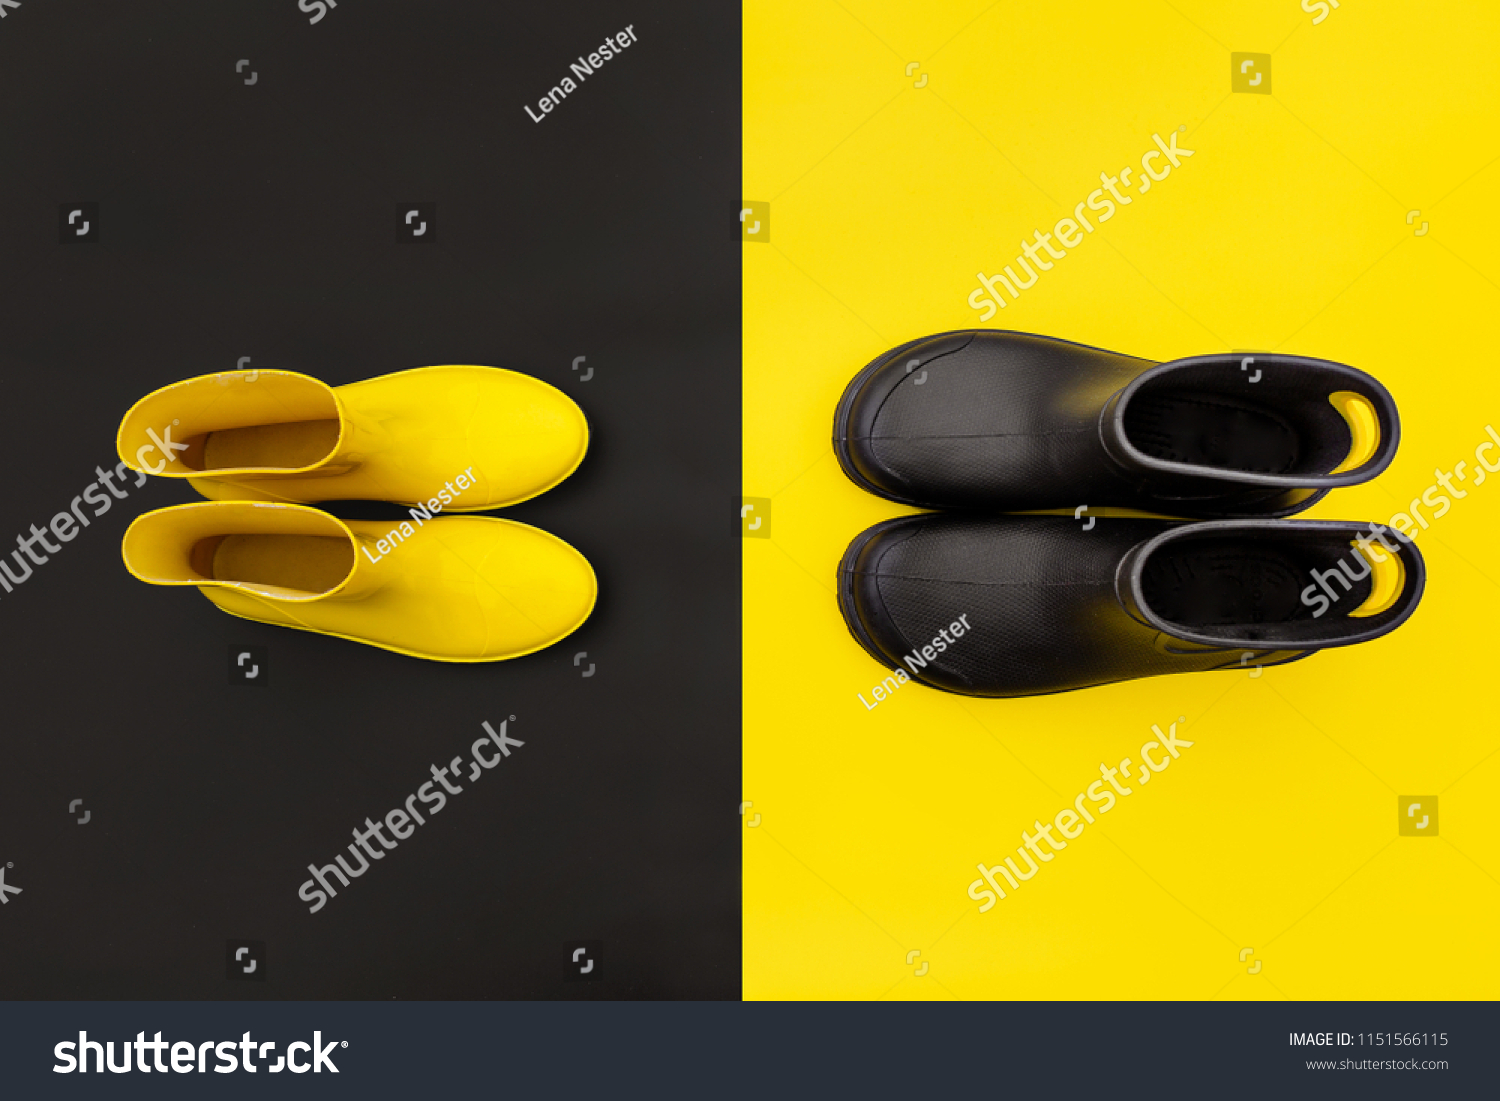 Two pairs of gumboots - yellow female and black male - standing opposite to each other on the inverse backgrounds. Top view. The concept of He and She #1151566115